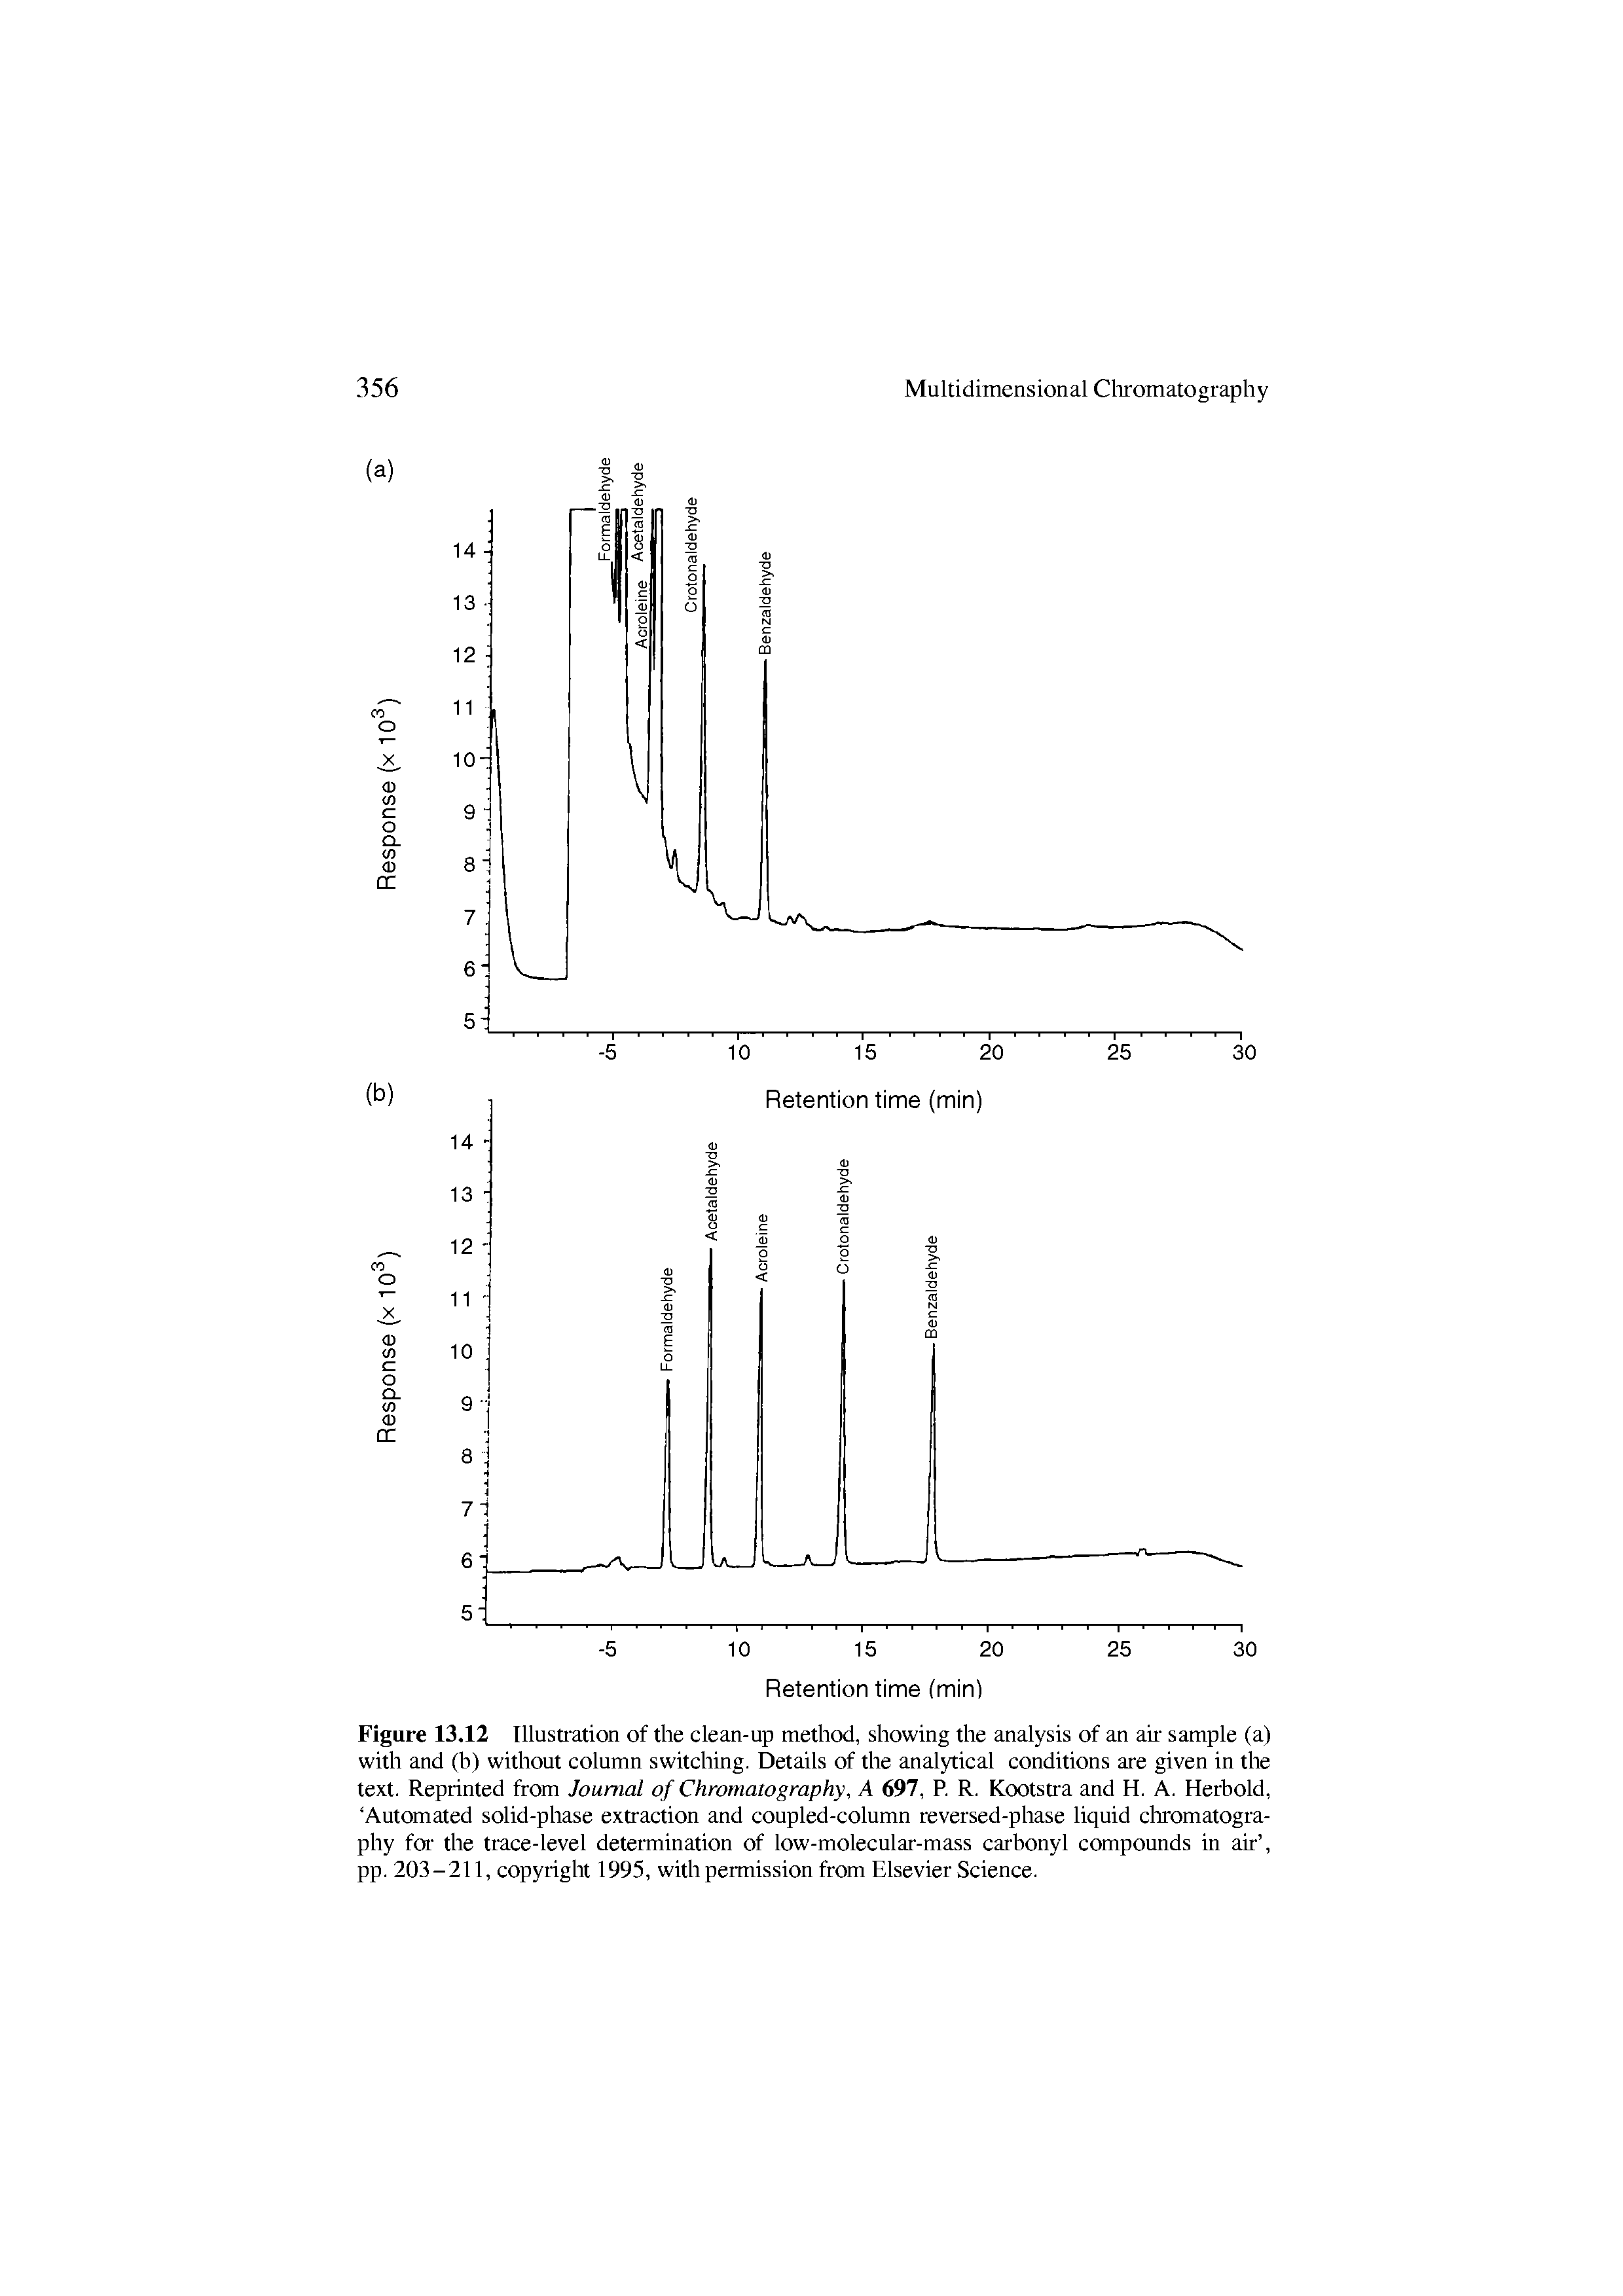 Figure 13,12 Illusti ation of the clean-up method, showing the analysis of an air sample (a) with and (b) without column switching. Details of the analytical conditions are given in the text. Reprinted from Journal of Chromatography, A 697, R R. Kootsti a and H. A. Herbold, Automated solid-phase exti action and coupled-column reversed-phase liquid cltromatogra-phy for the trace-level determination of low-molecular-mass carbonyl compounds in ak , pp. 203-211, copyright 1995, with permission from Elsevier Science.